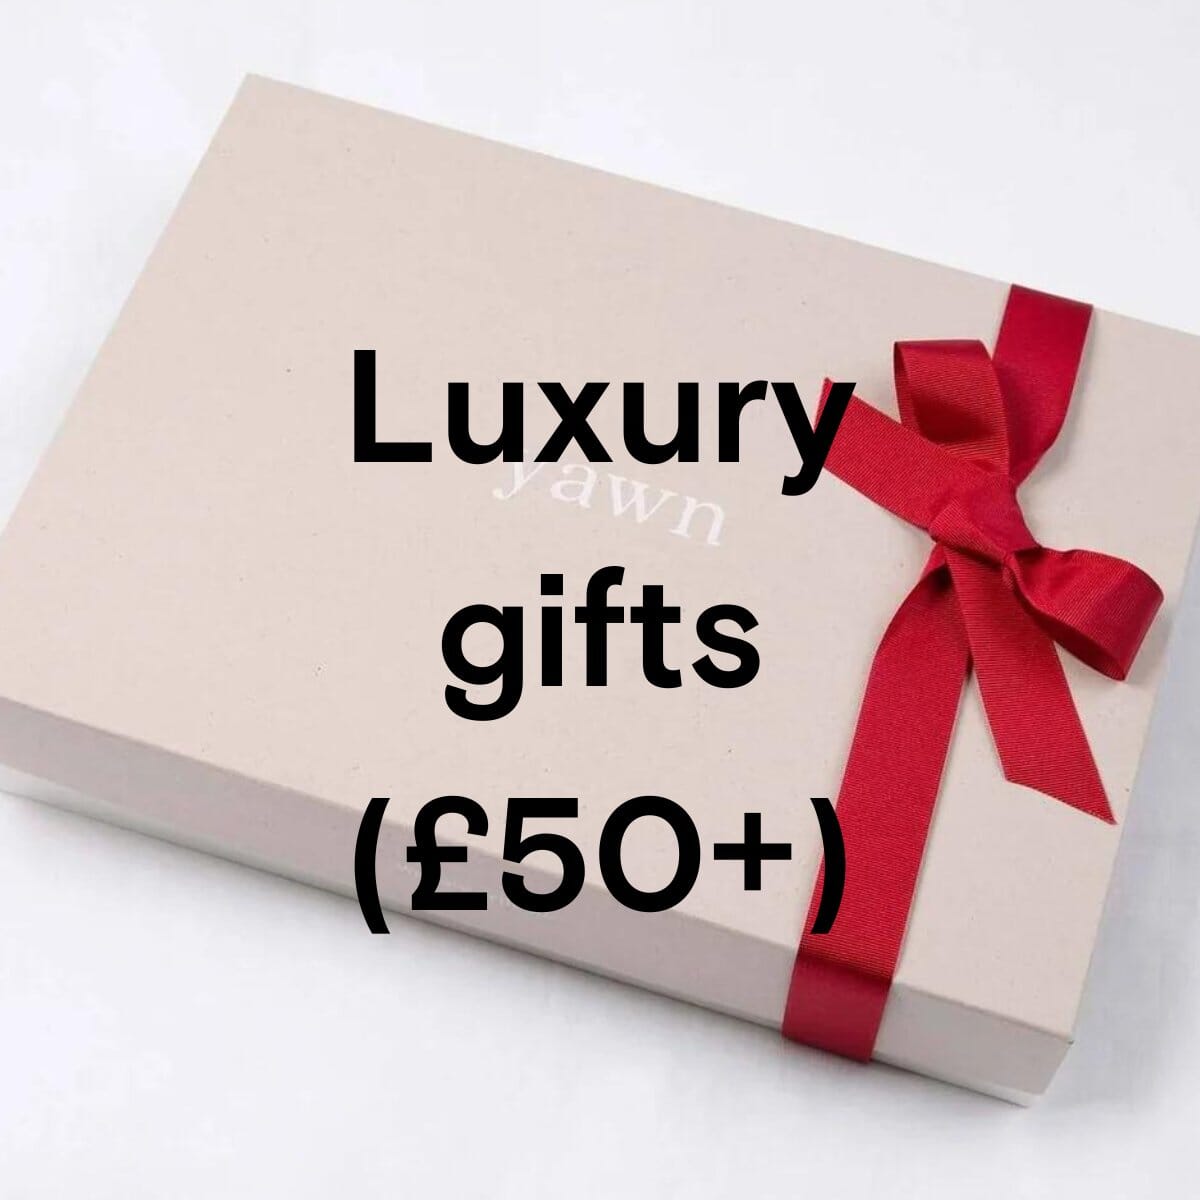 Luxury gifts